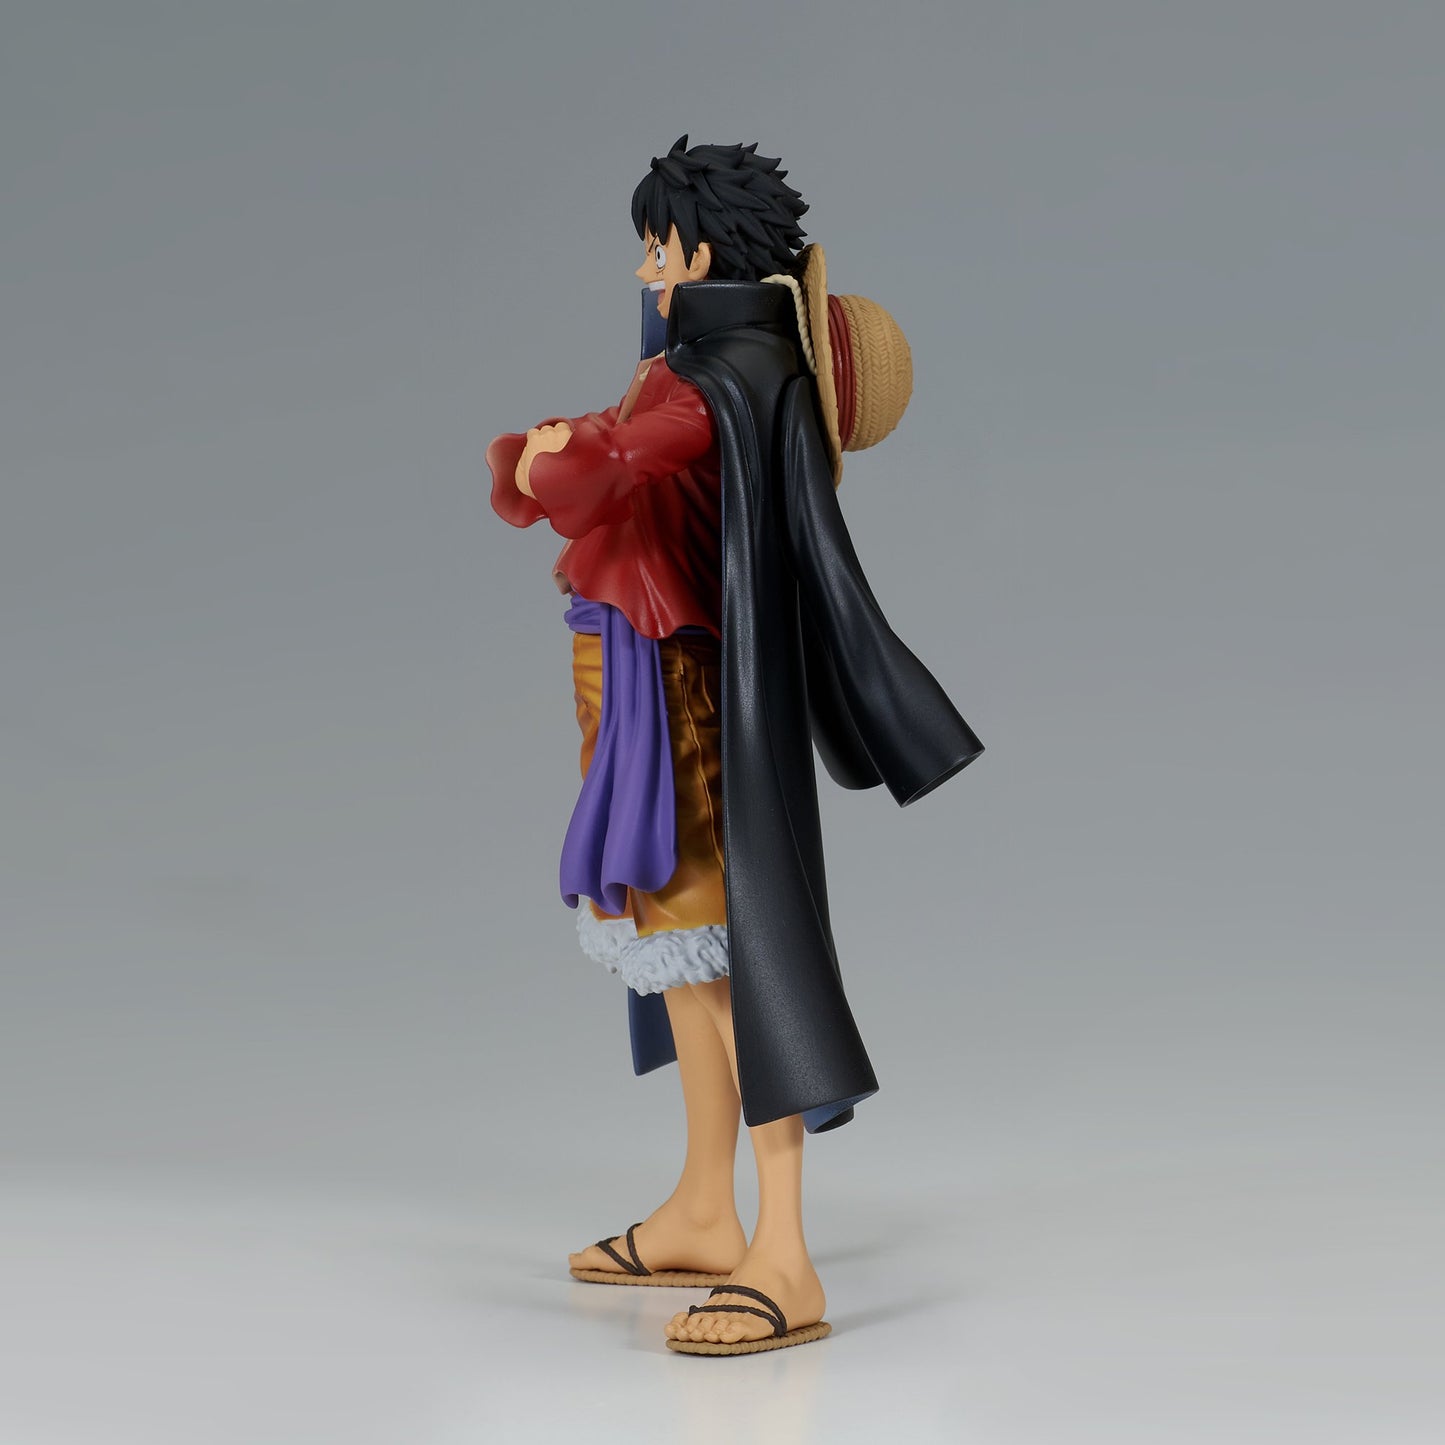 Monkey D. Luffy Wano Country (One Piece) The Grandline Series DXF Vol. 4 Statue